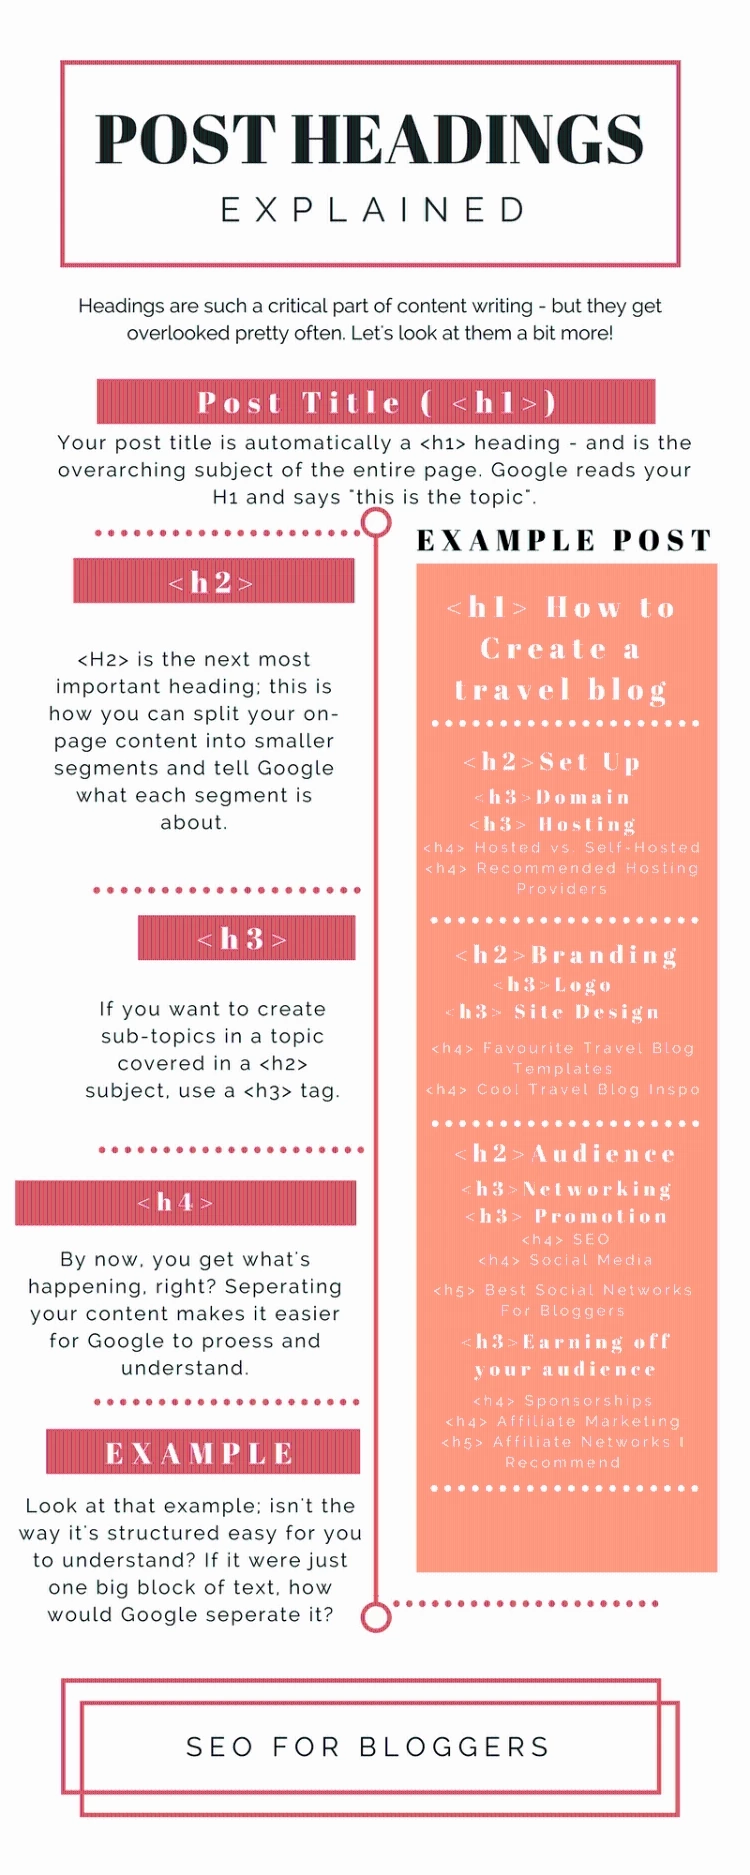 SEO Essential Tips For Bloggers: HEADINGS. Headings Are So Important For Organising Your Post Content And Helping Google To Sort Through And Rank Your Content.